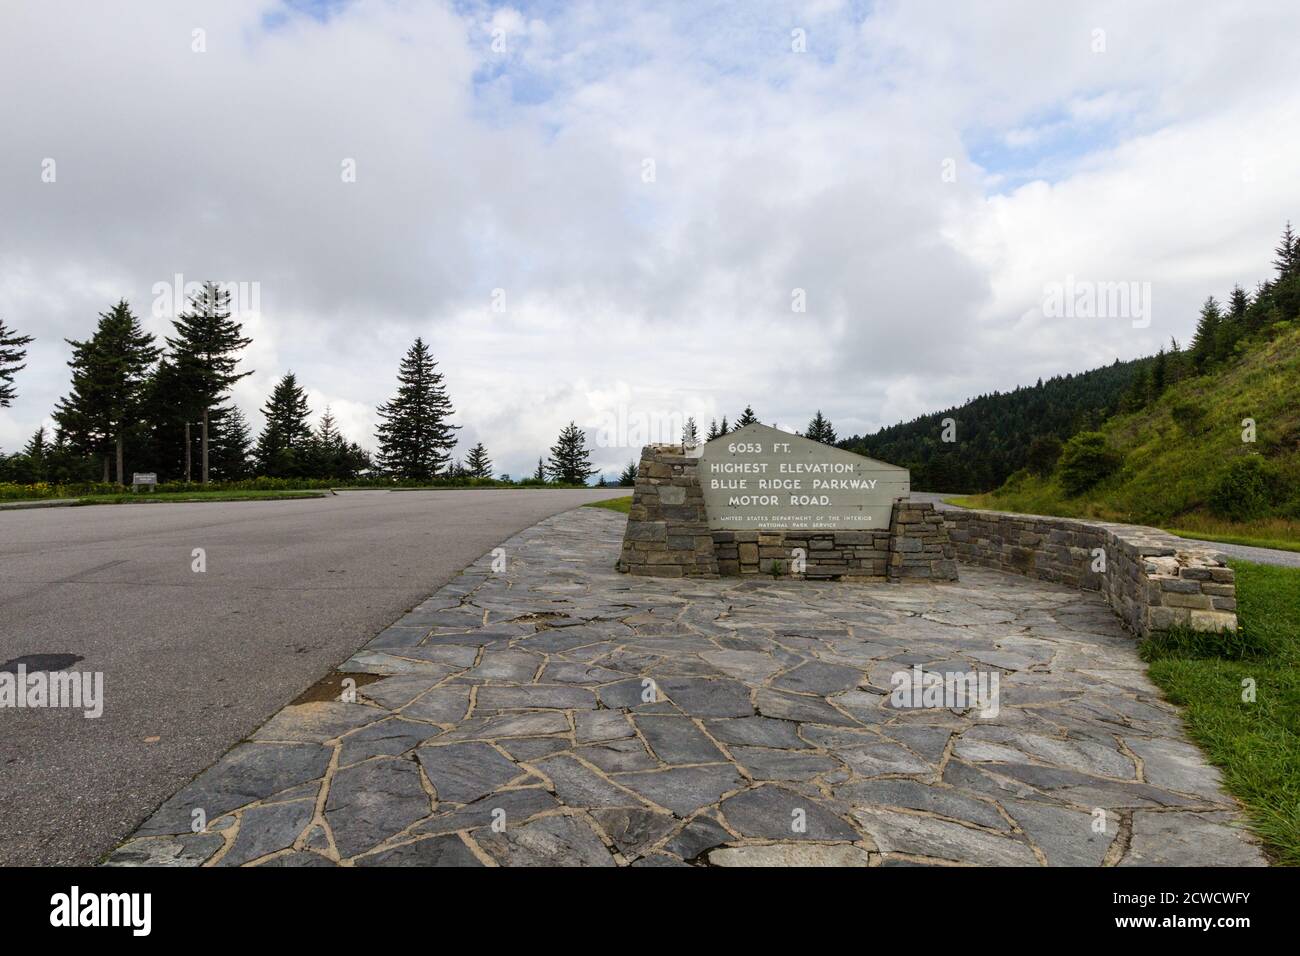 Sign for the summit of the Blue Ridge Parkway in North Carolina. Stock Photo